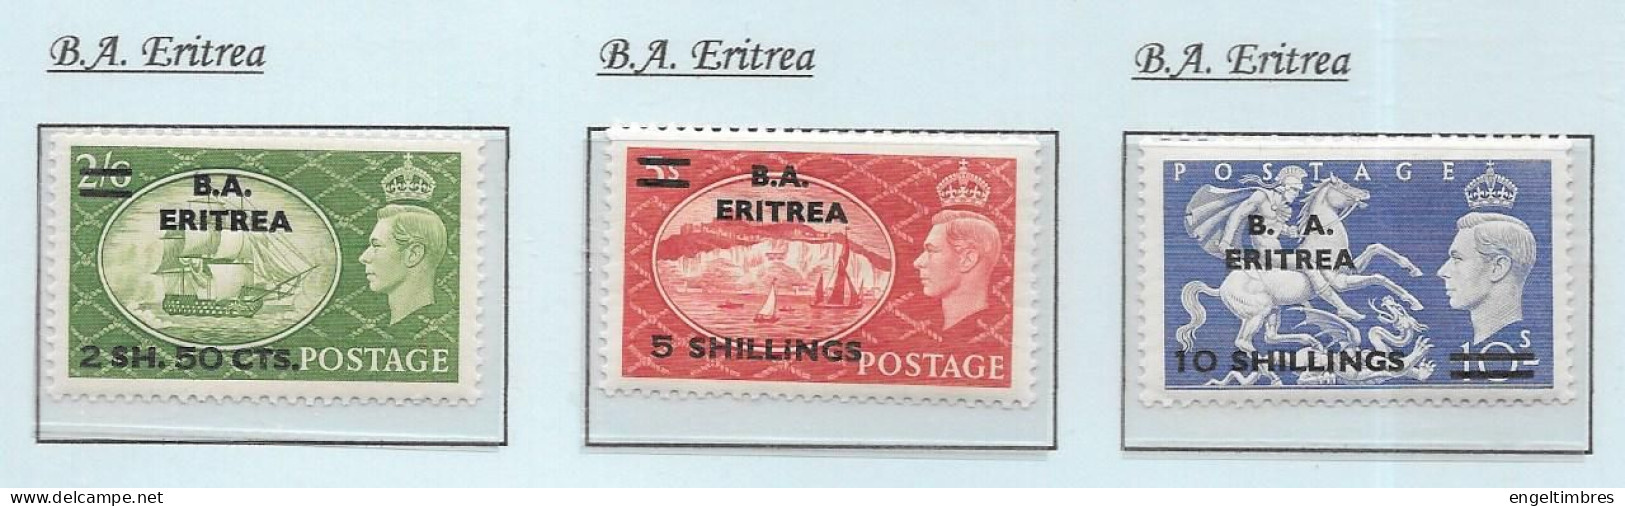 Gb 1948  Festival Of Britain OVERPRINTED B. A. ERITREA   (3)     MOUNTED MINT See Notes & Scans - Unused Stamps